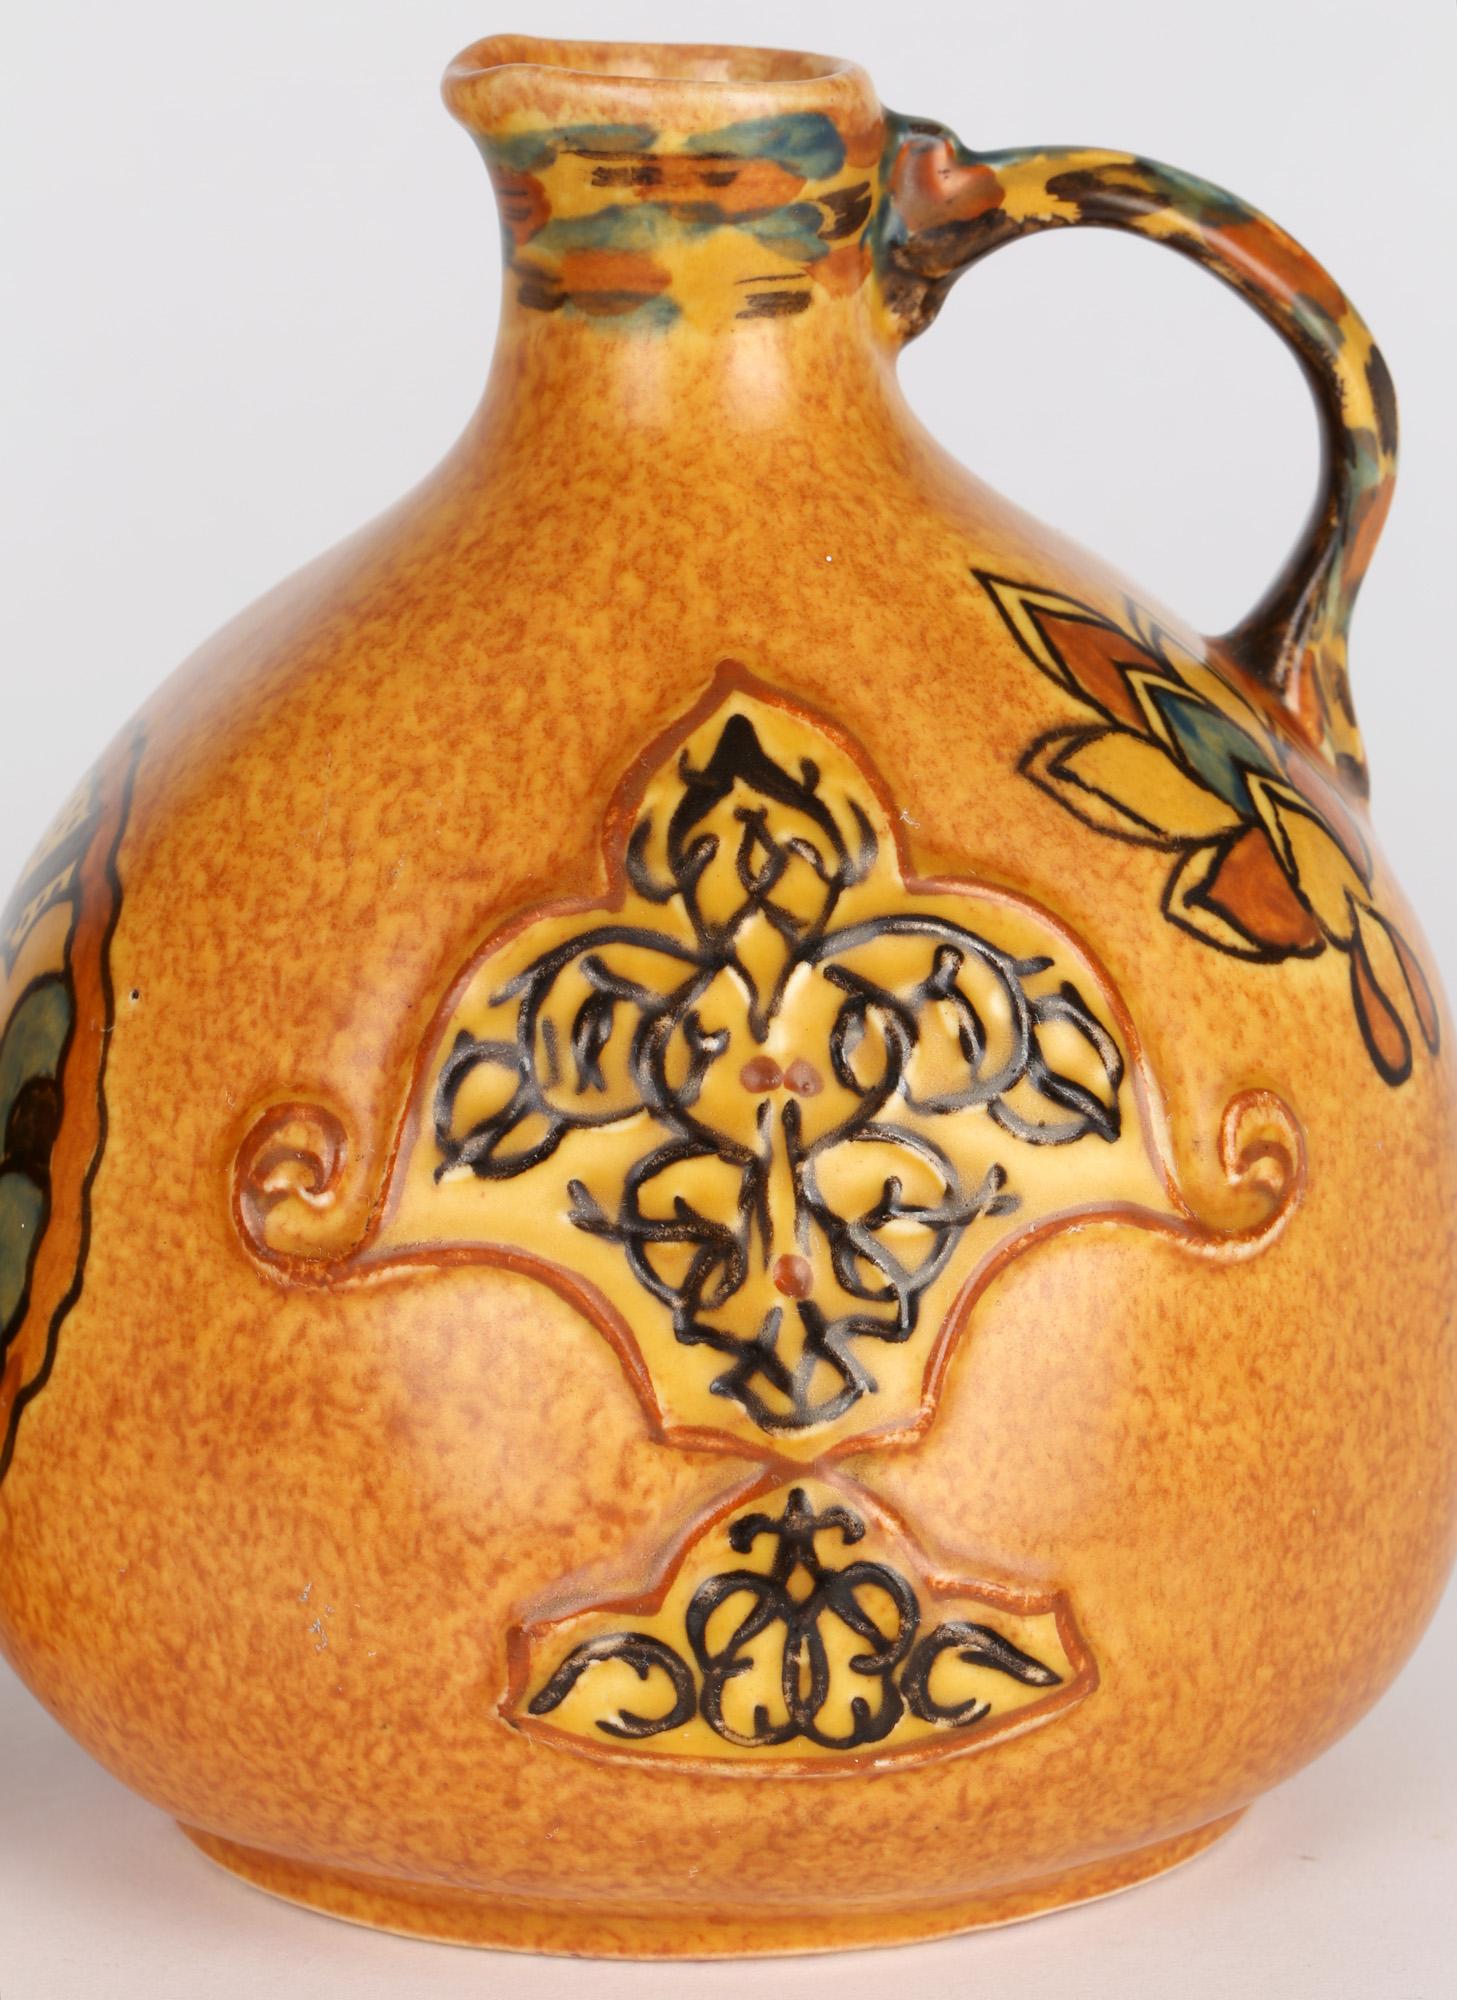 George Clews Tunstall Pair Chameleon Ware Art Deco Persian Pottery Jugs In Good Condition For Sale In Bishop's Stortford, Hertfordshire